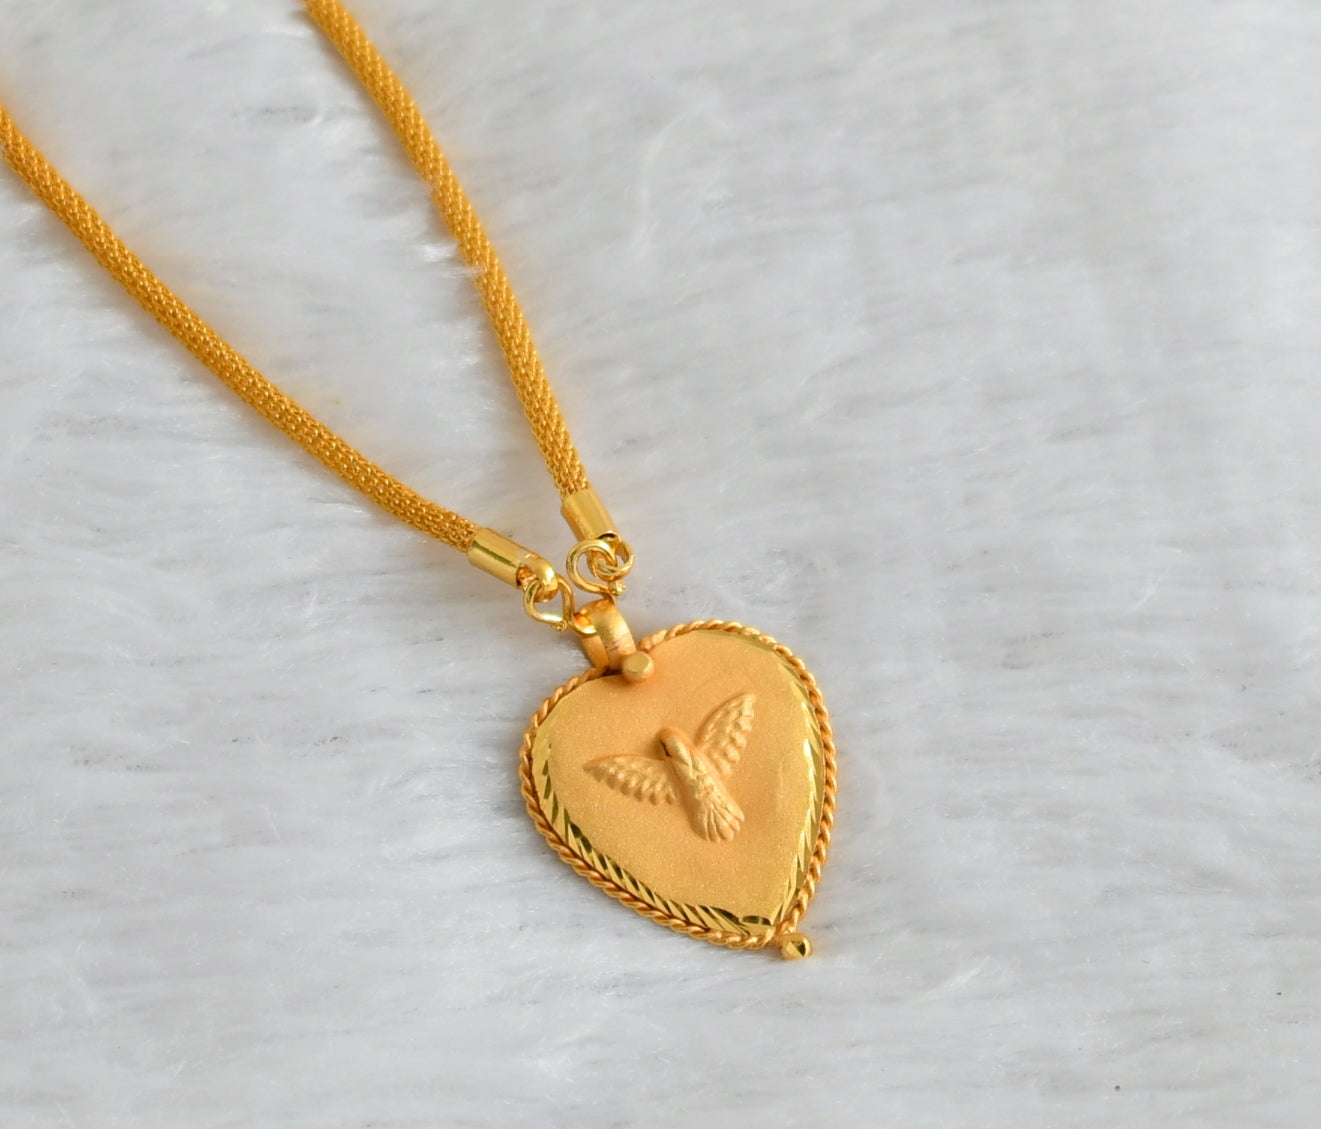 Gold tone 24 inches chain with heart pendant dj-47155